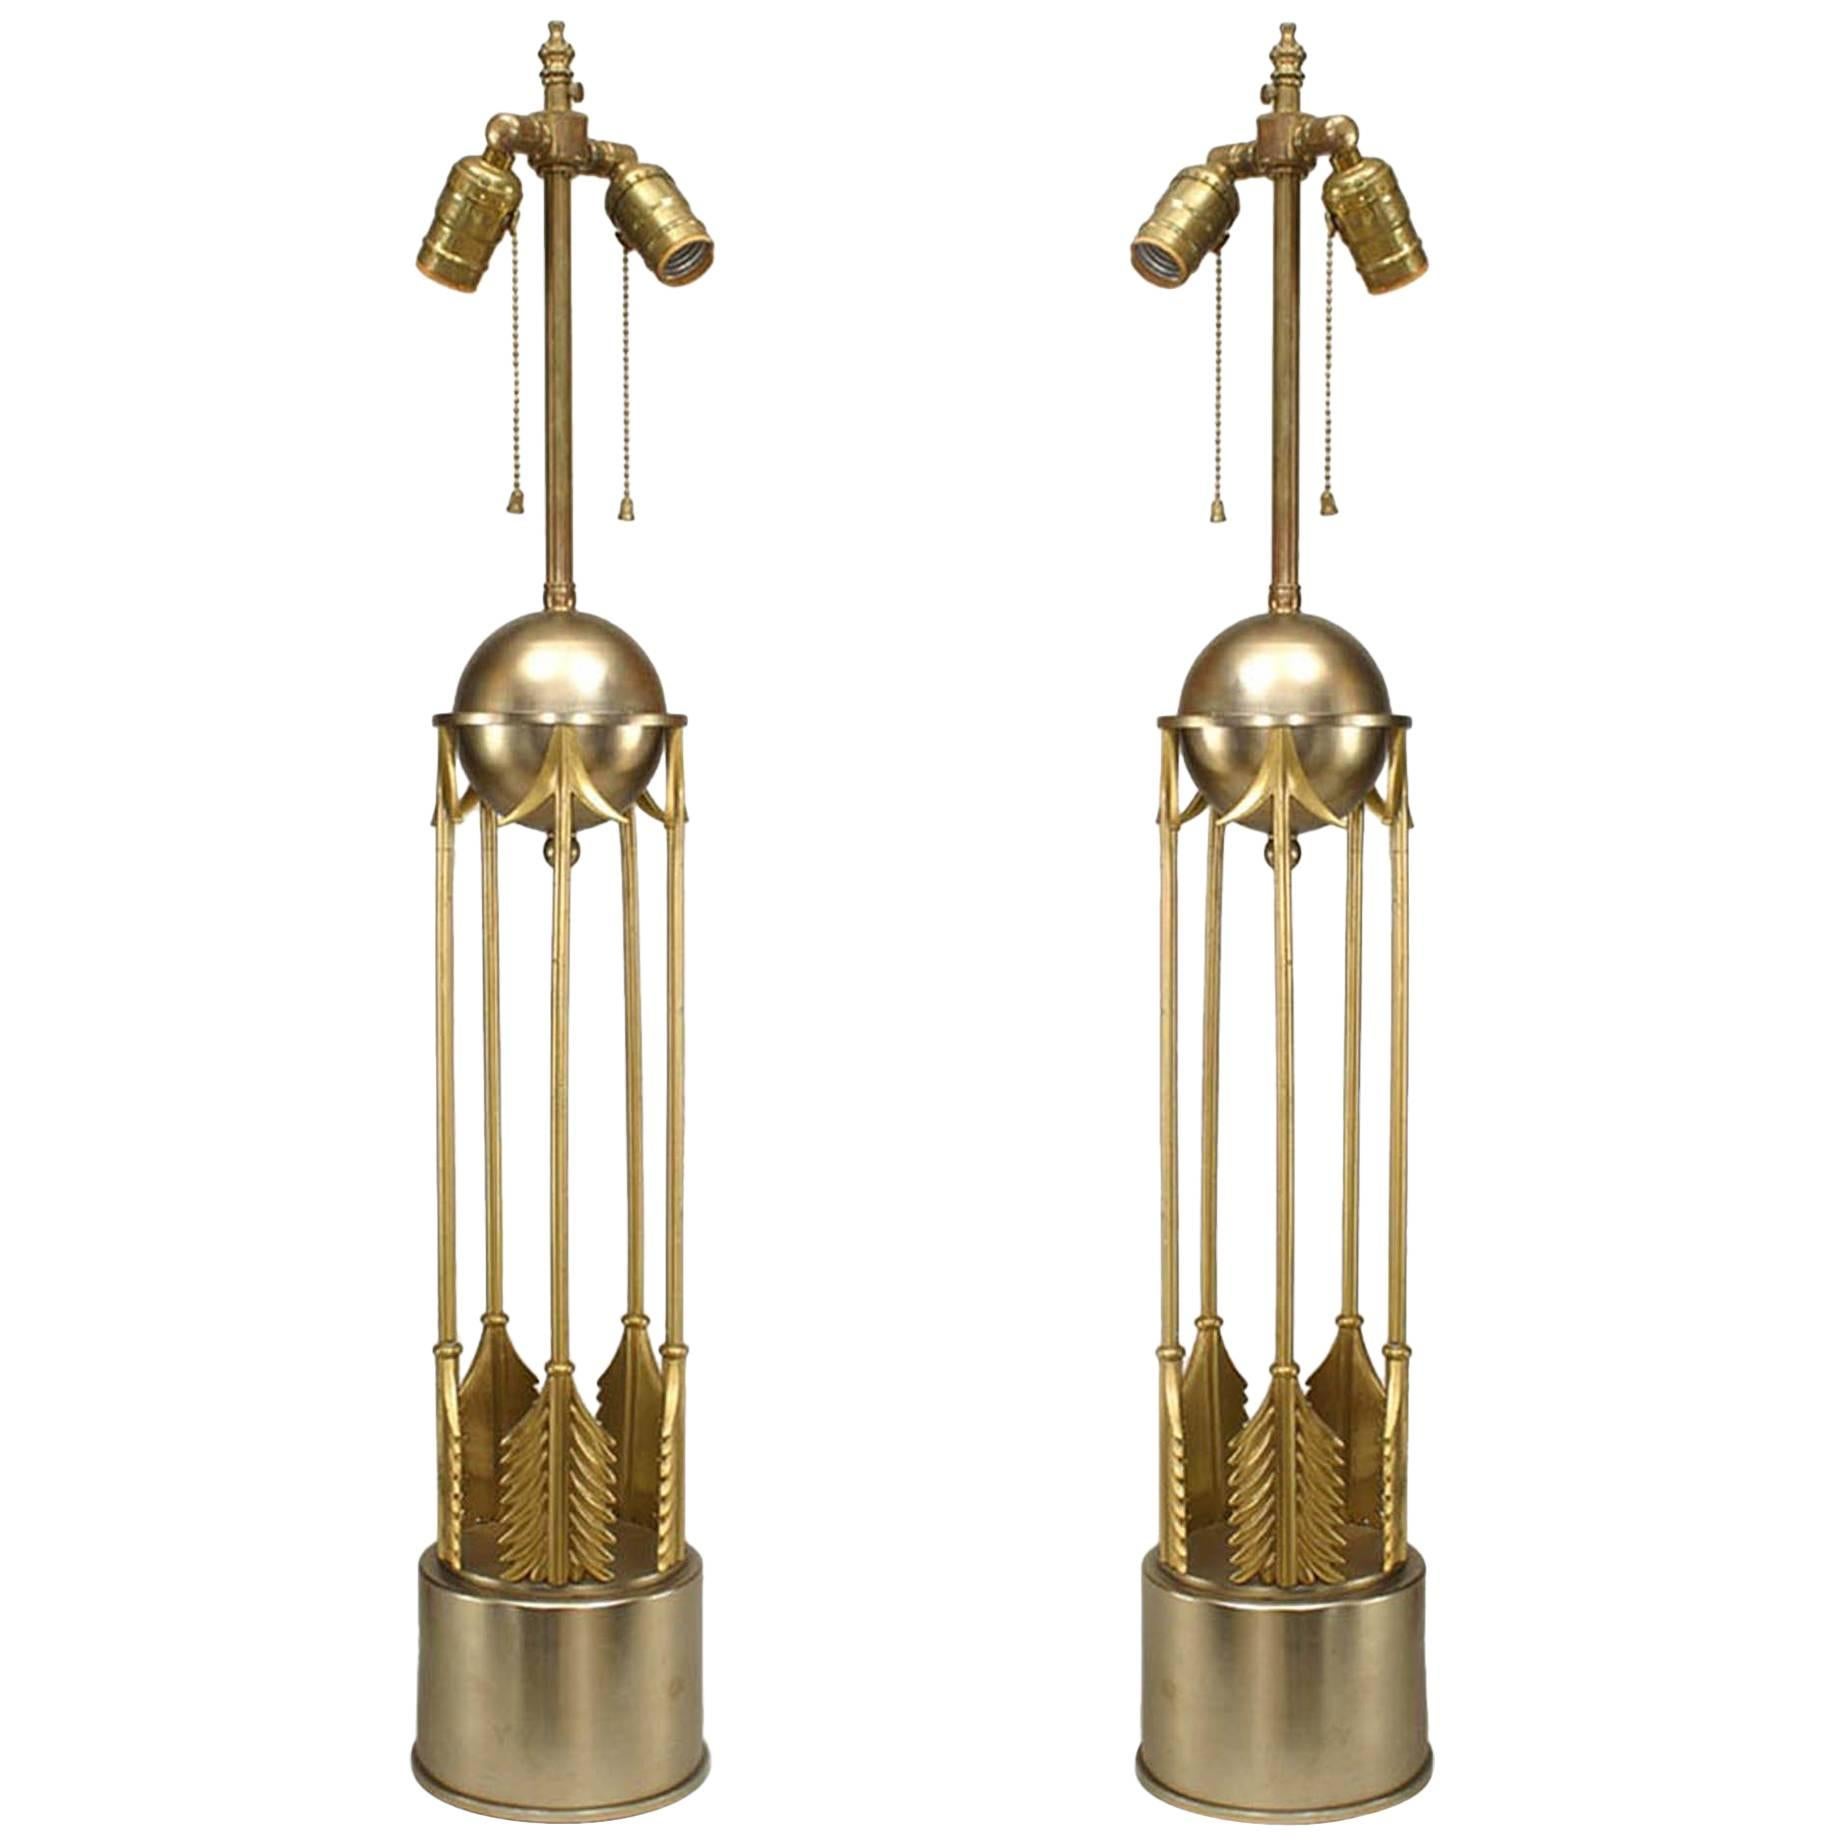 Pair of American Art Moderne 1950s Steel and Brass Table Lamps